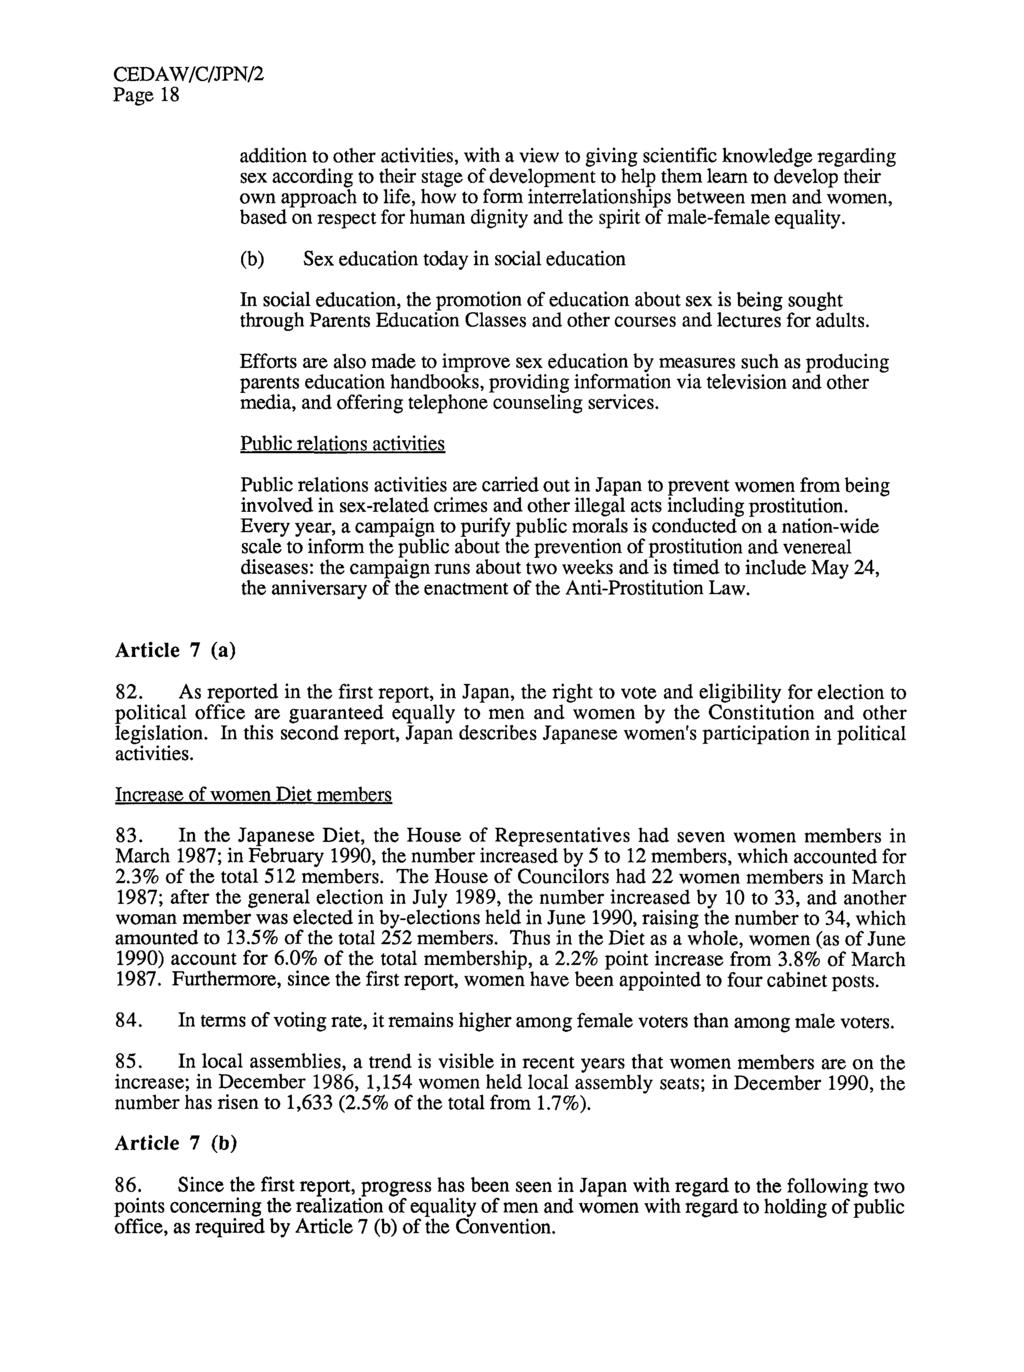 Page 18 addition to other activities, with a view to giving scientific knowledge regarding sex according to their stage of development to help them learn to develop their own approach to life, how to